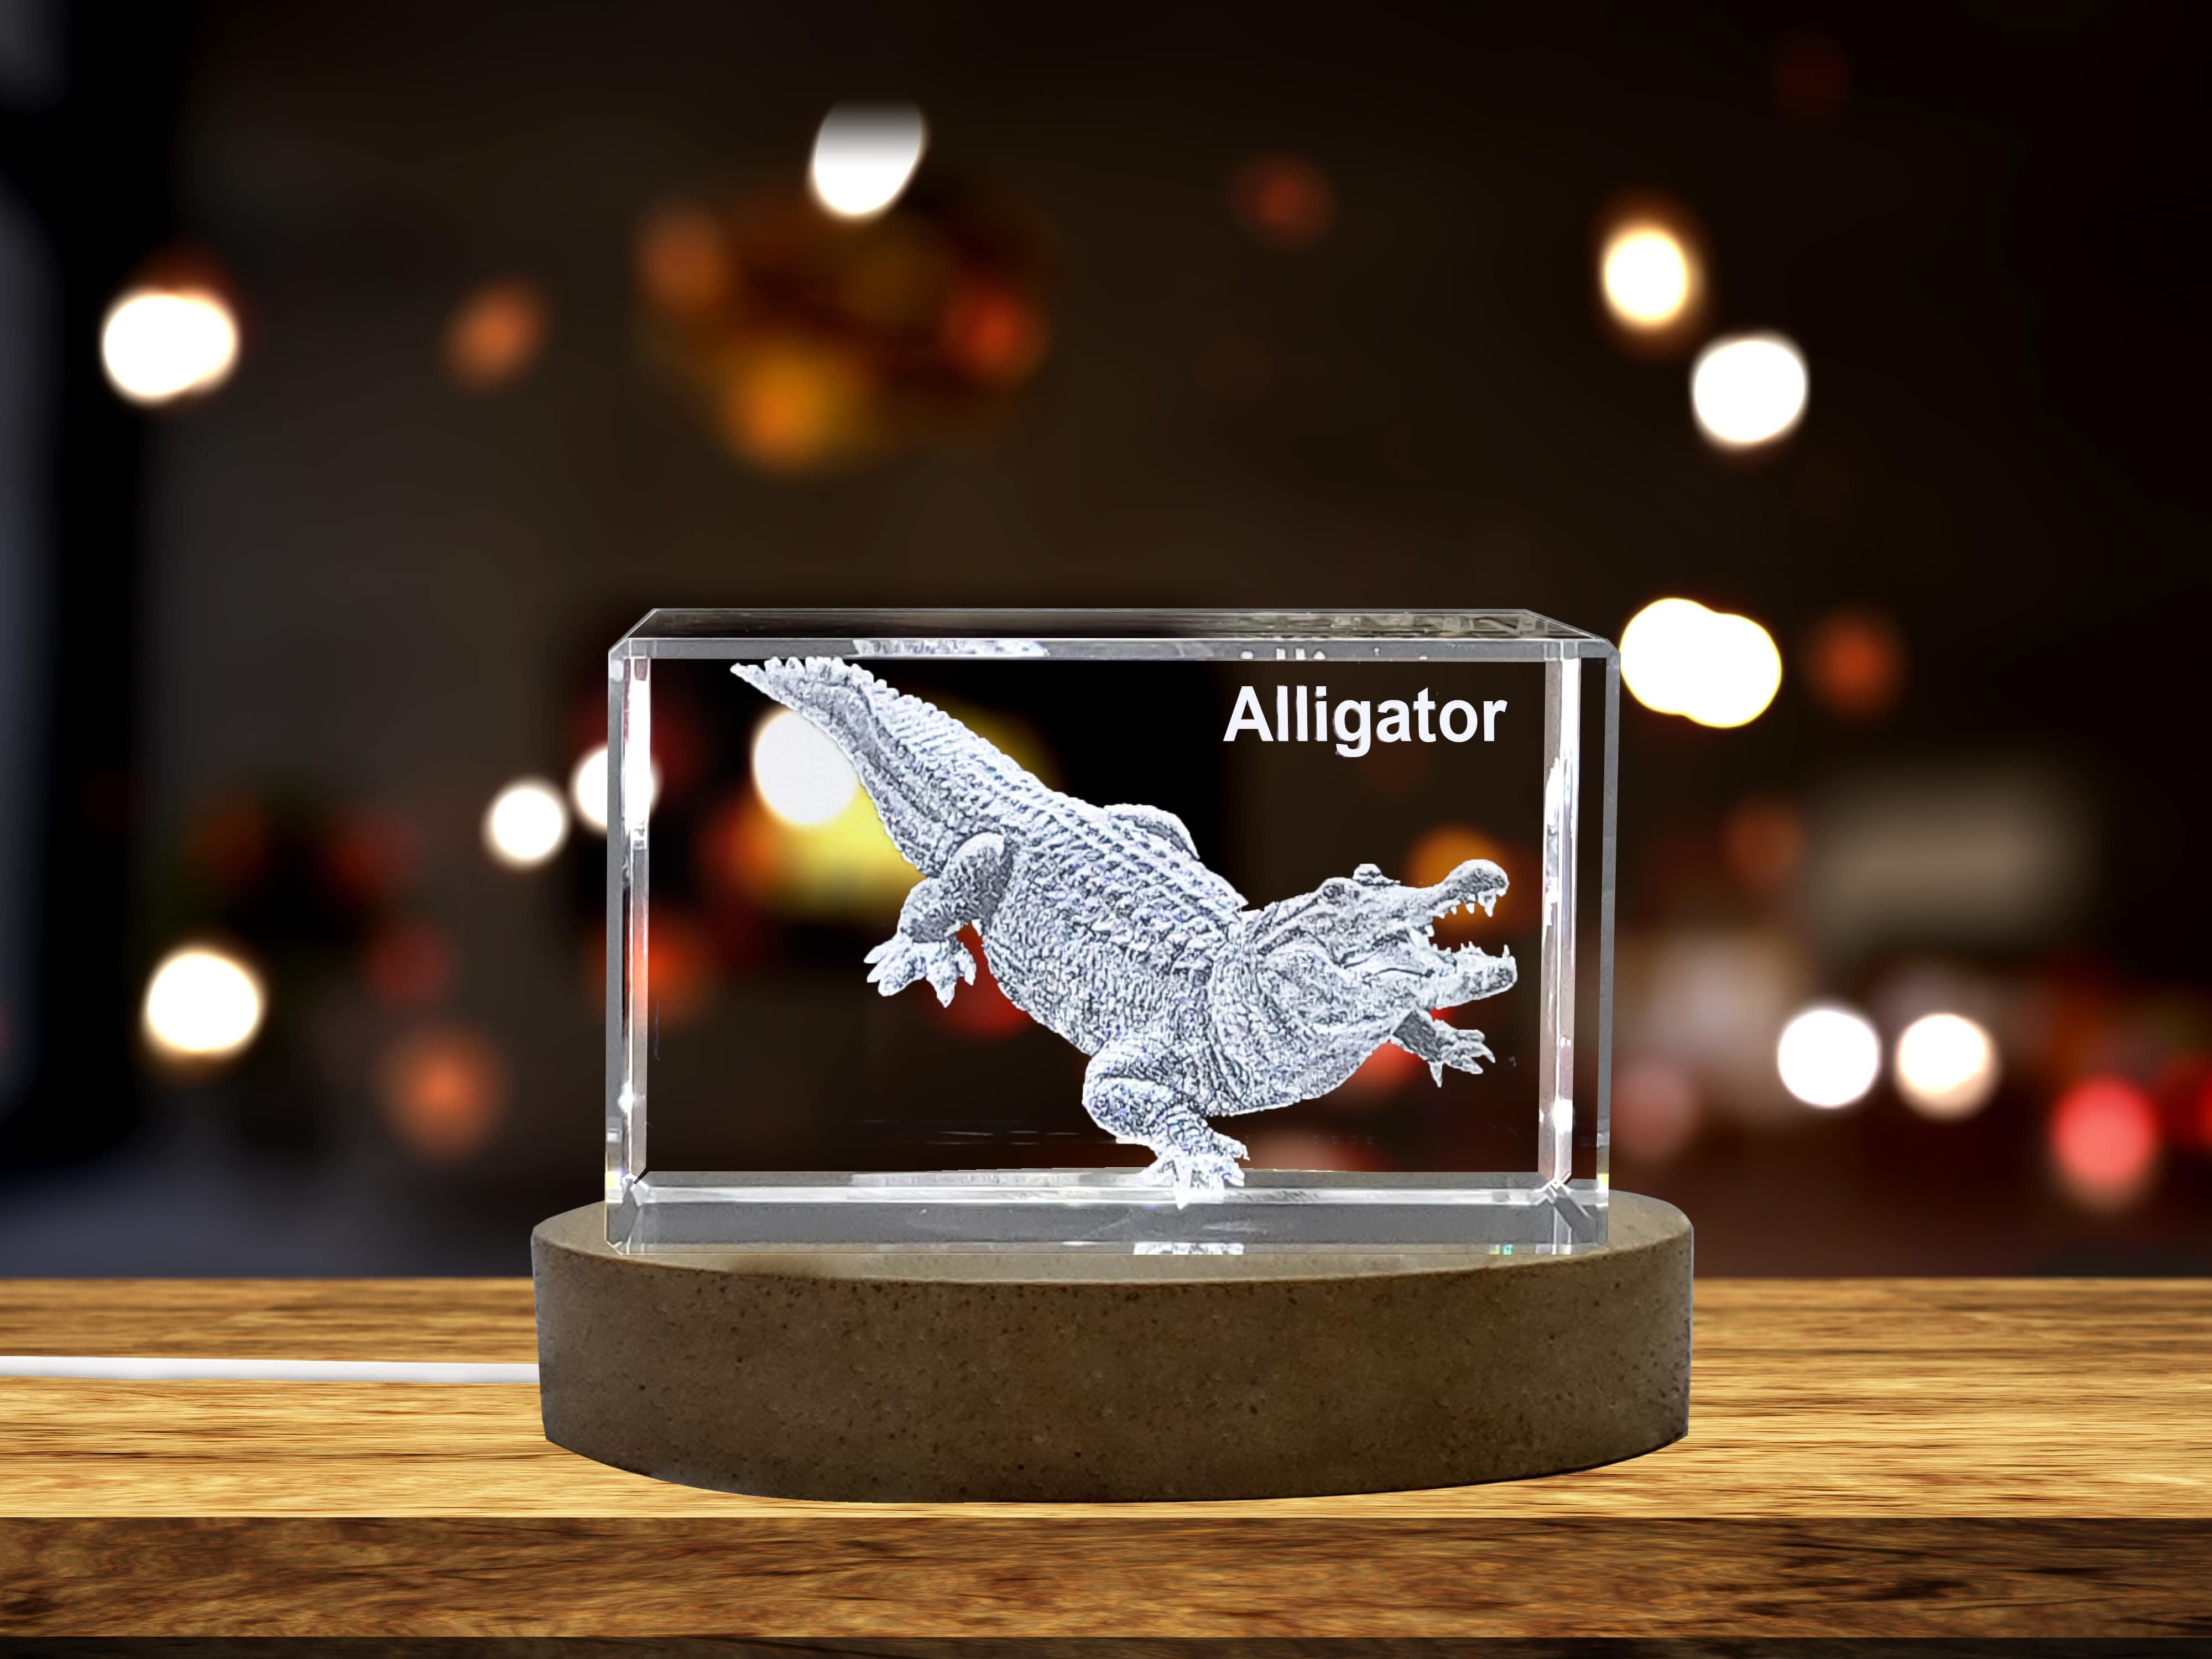 Unique 3D Engraved Crystal with Alligator Design - Perfect Gift for Reptile Lovers A&B Crystal Collection